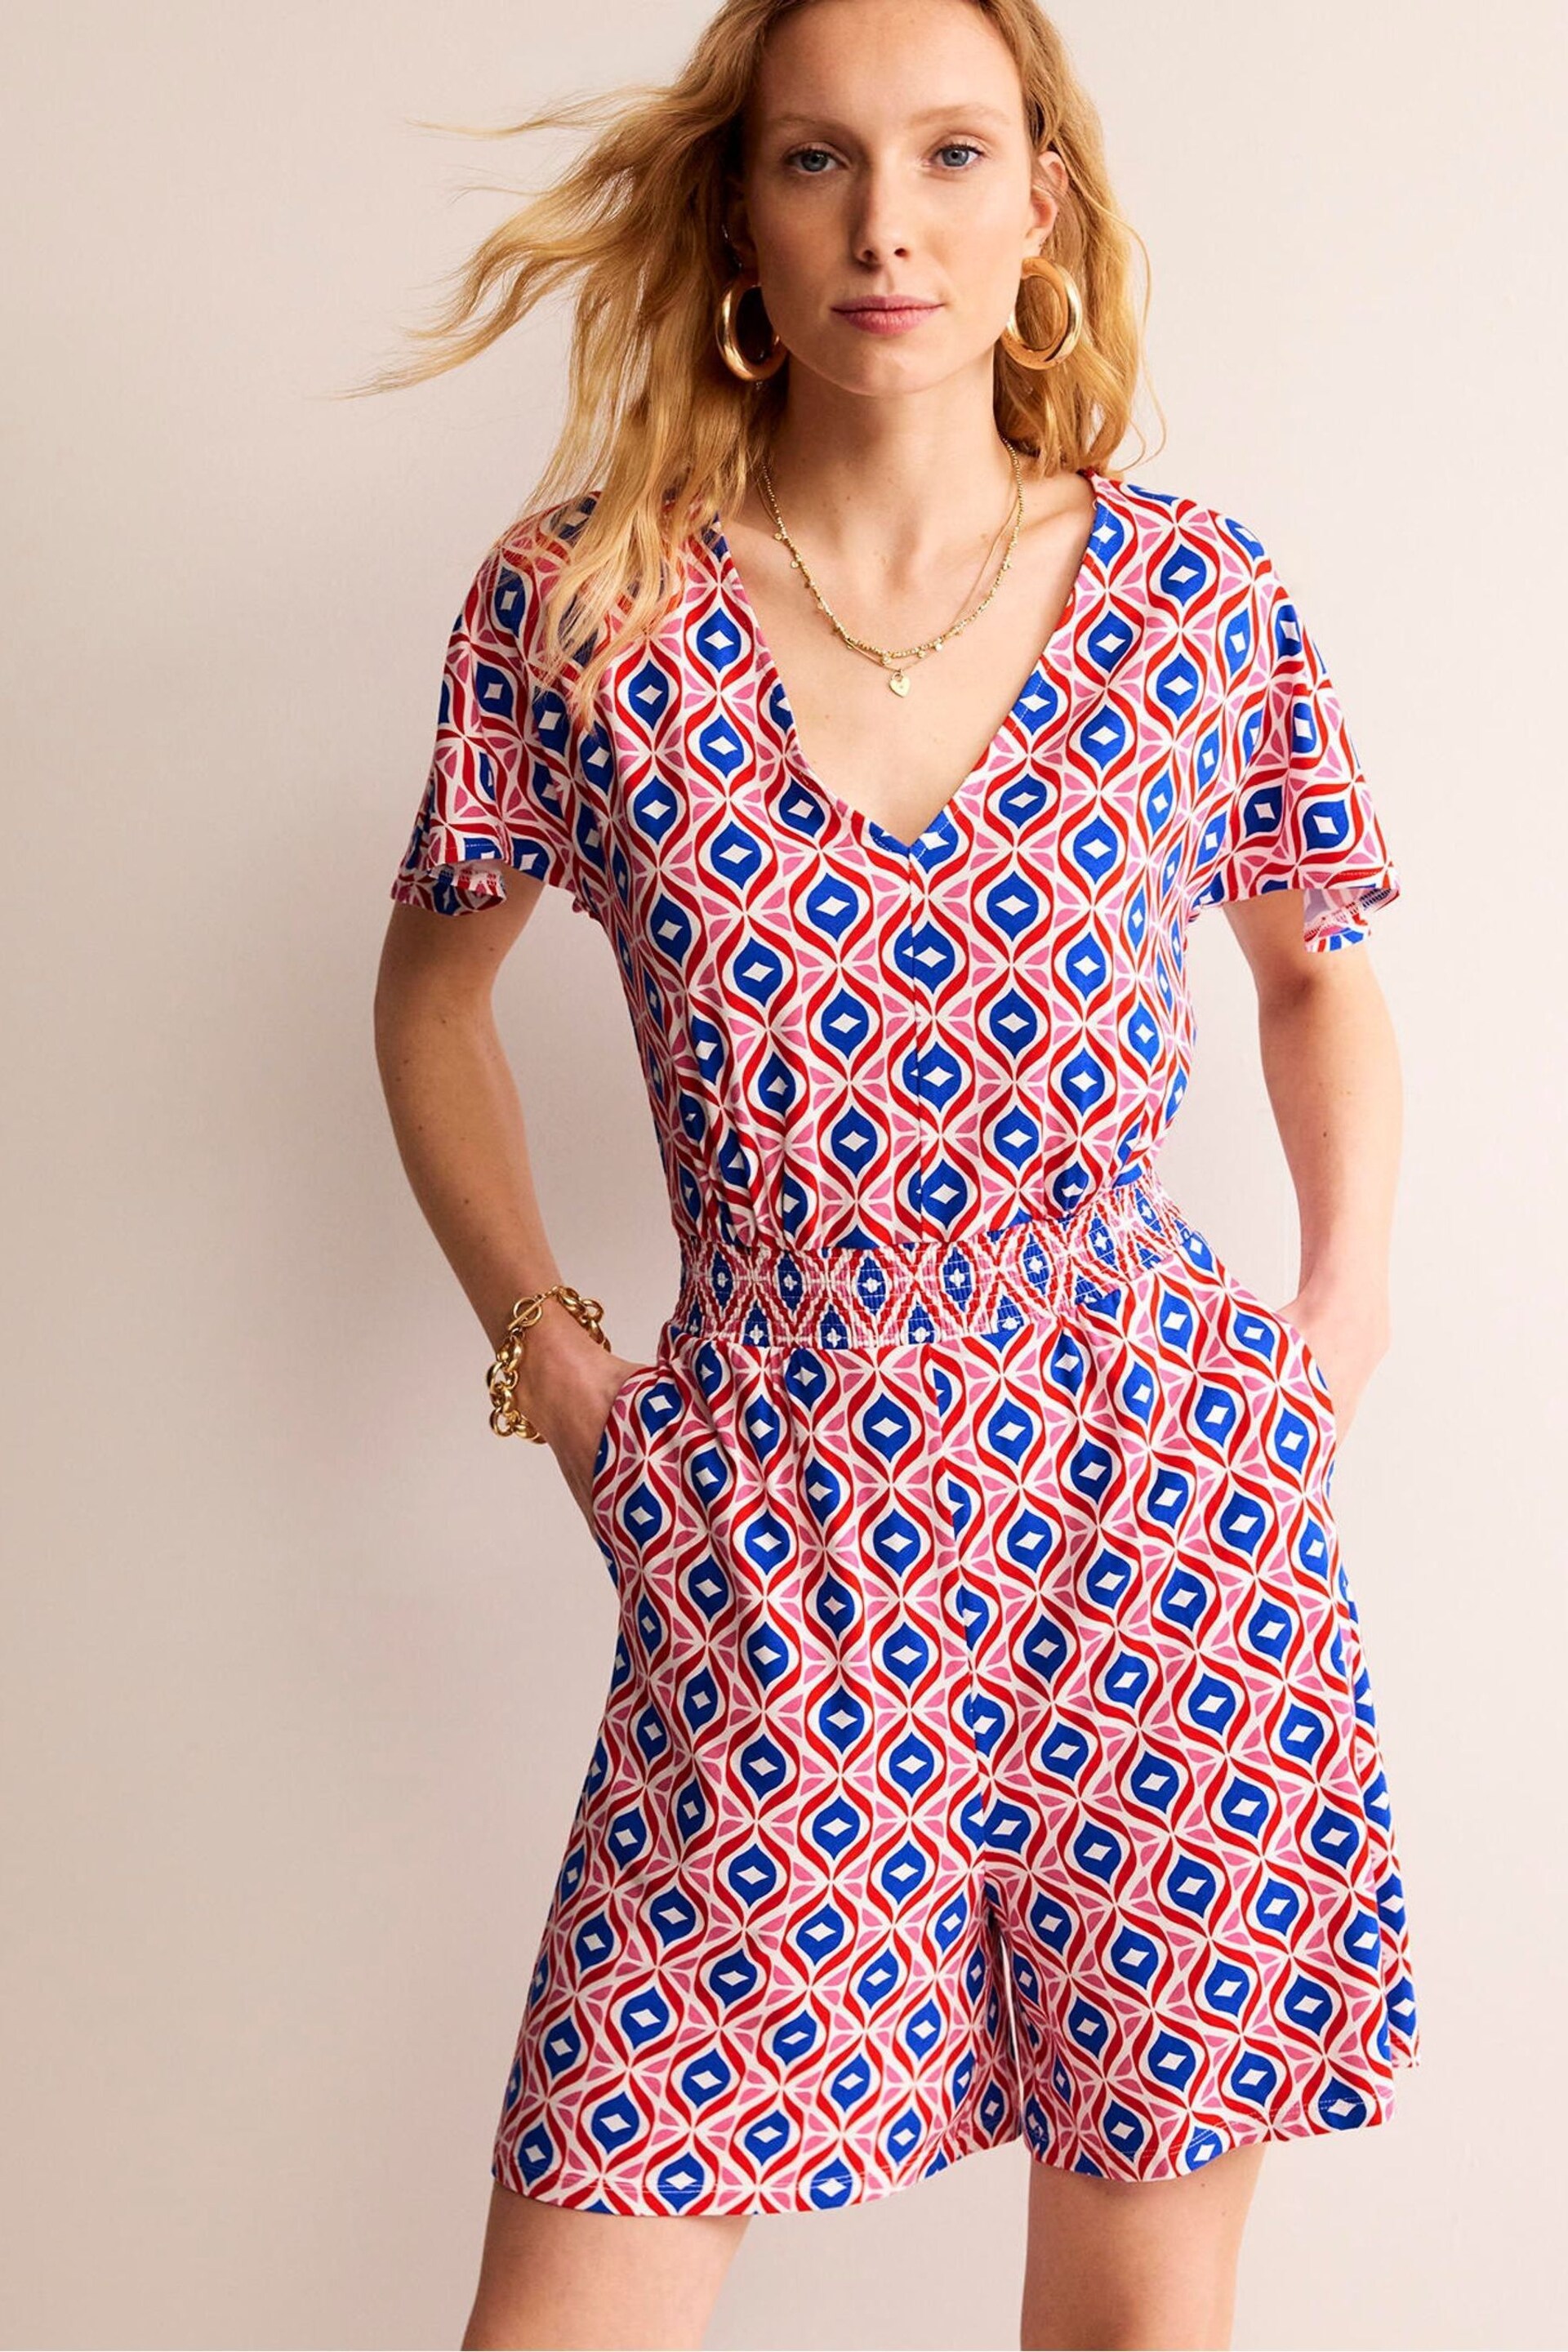 Boden Red Smocked Jersey Playsuit - Image 1 of 5